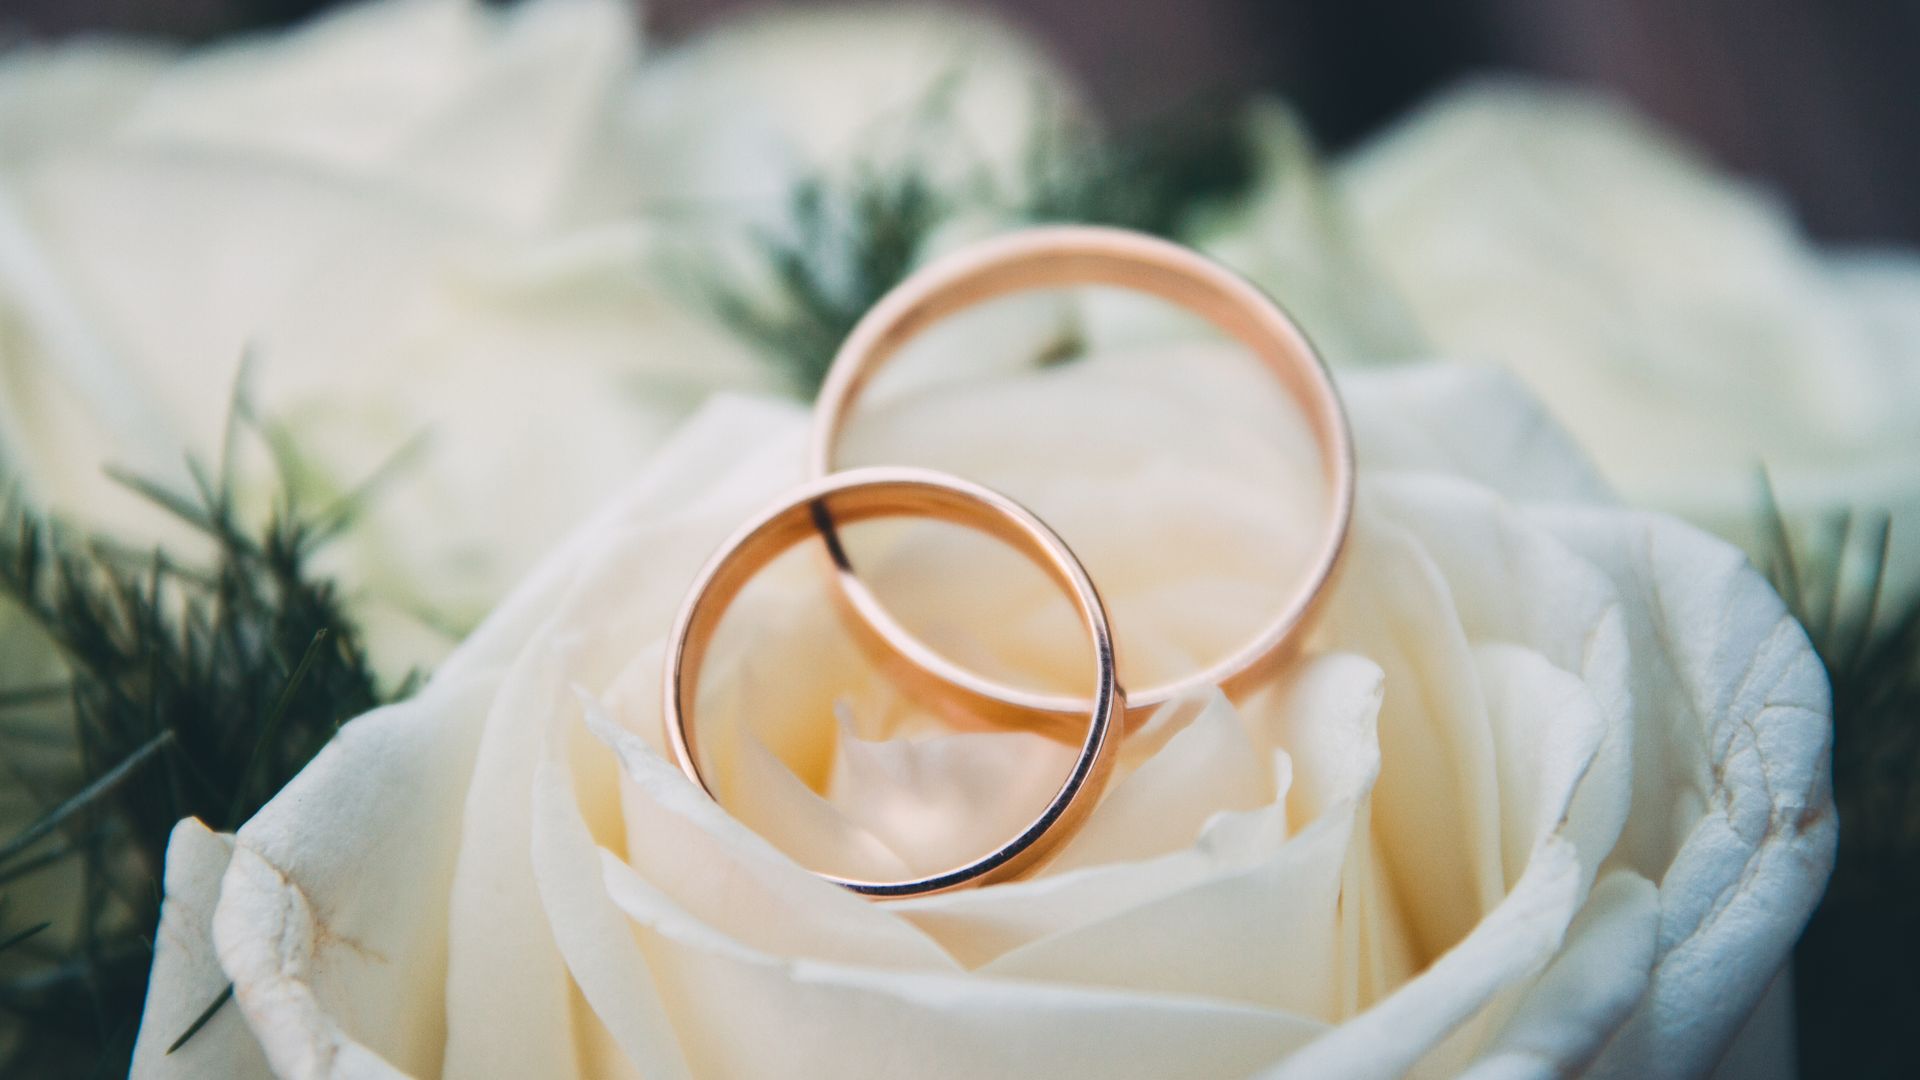 A pair of gold wedding bands on a rose